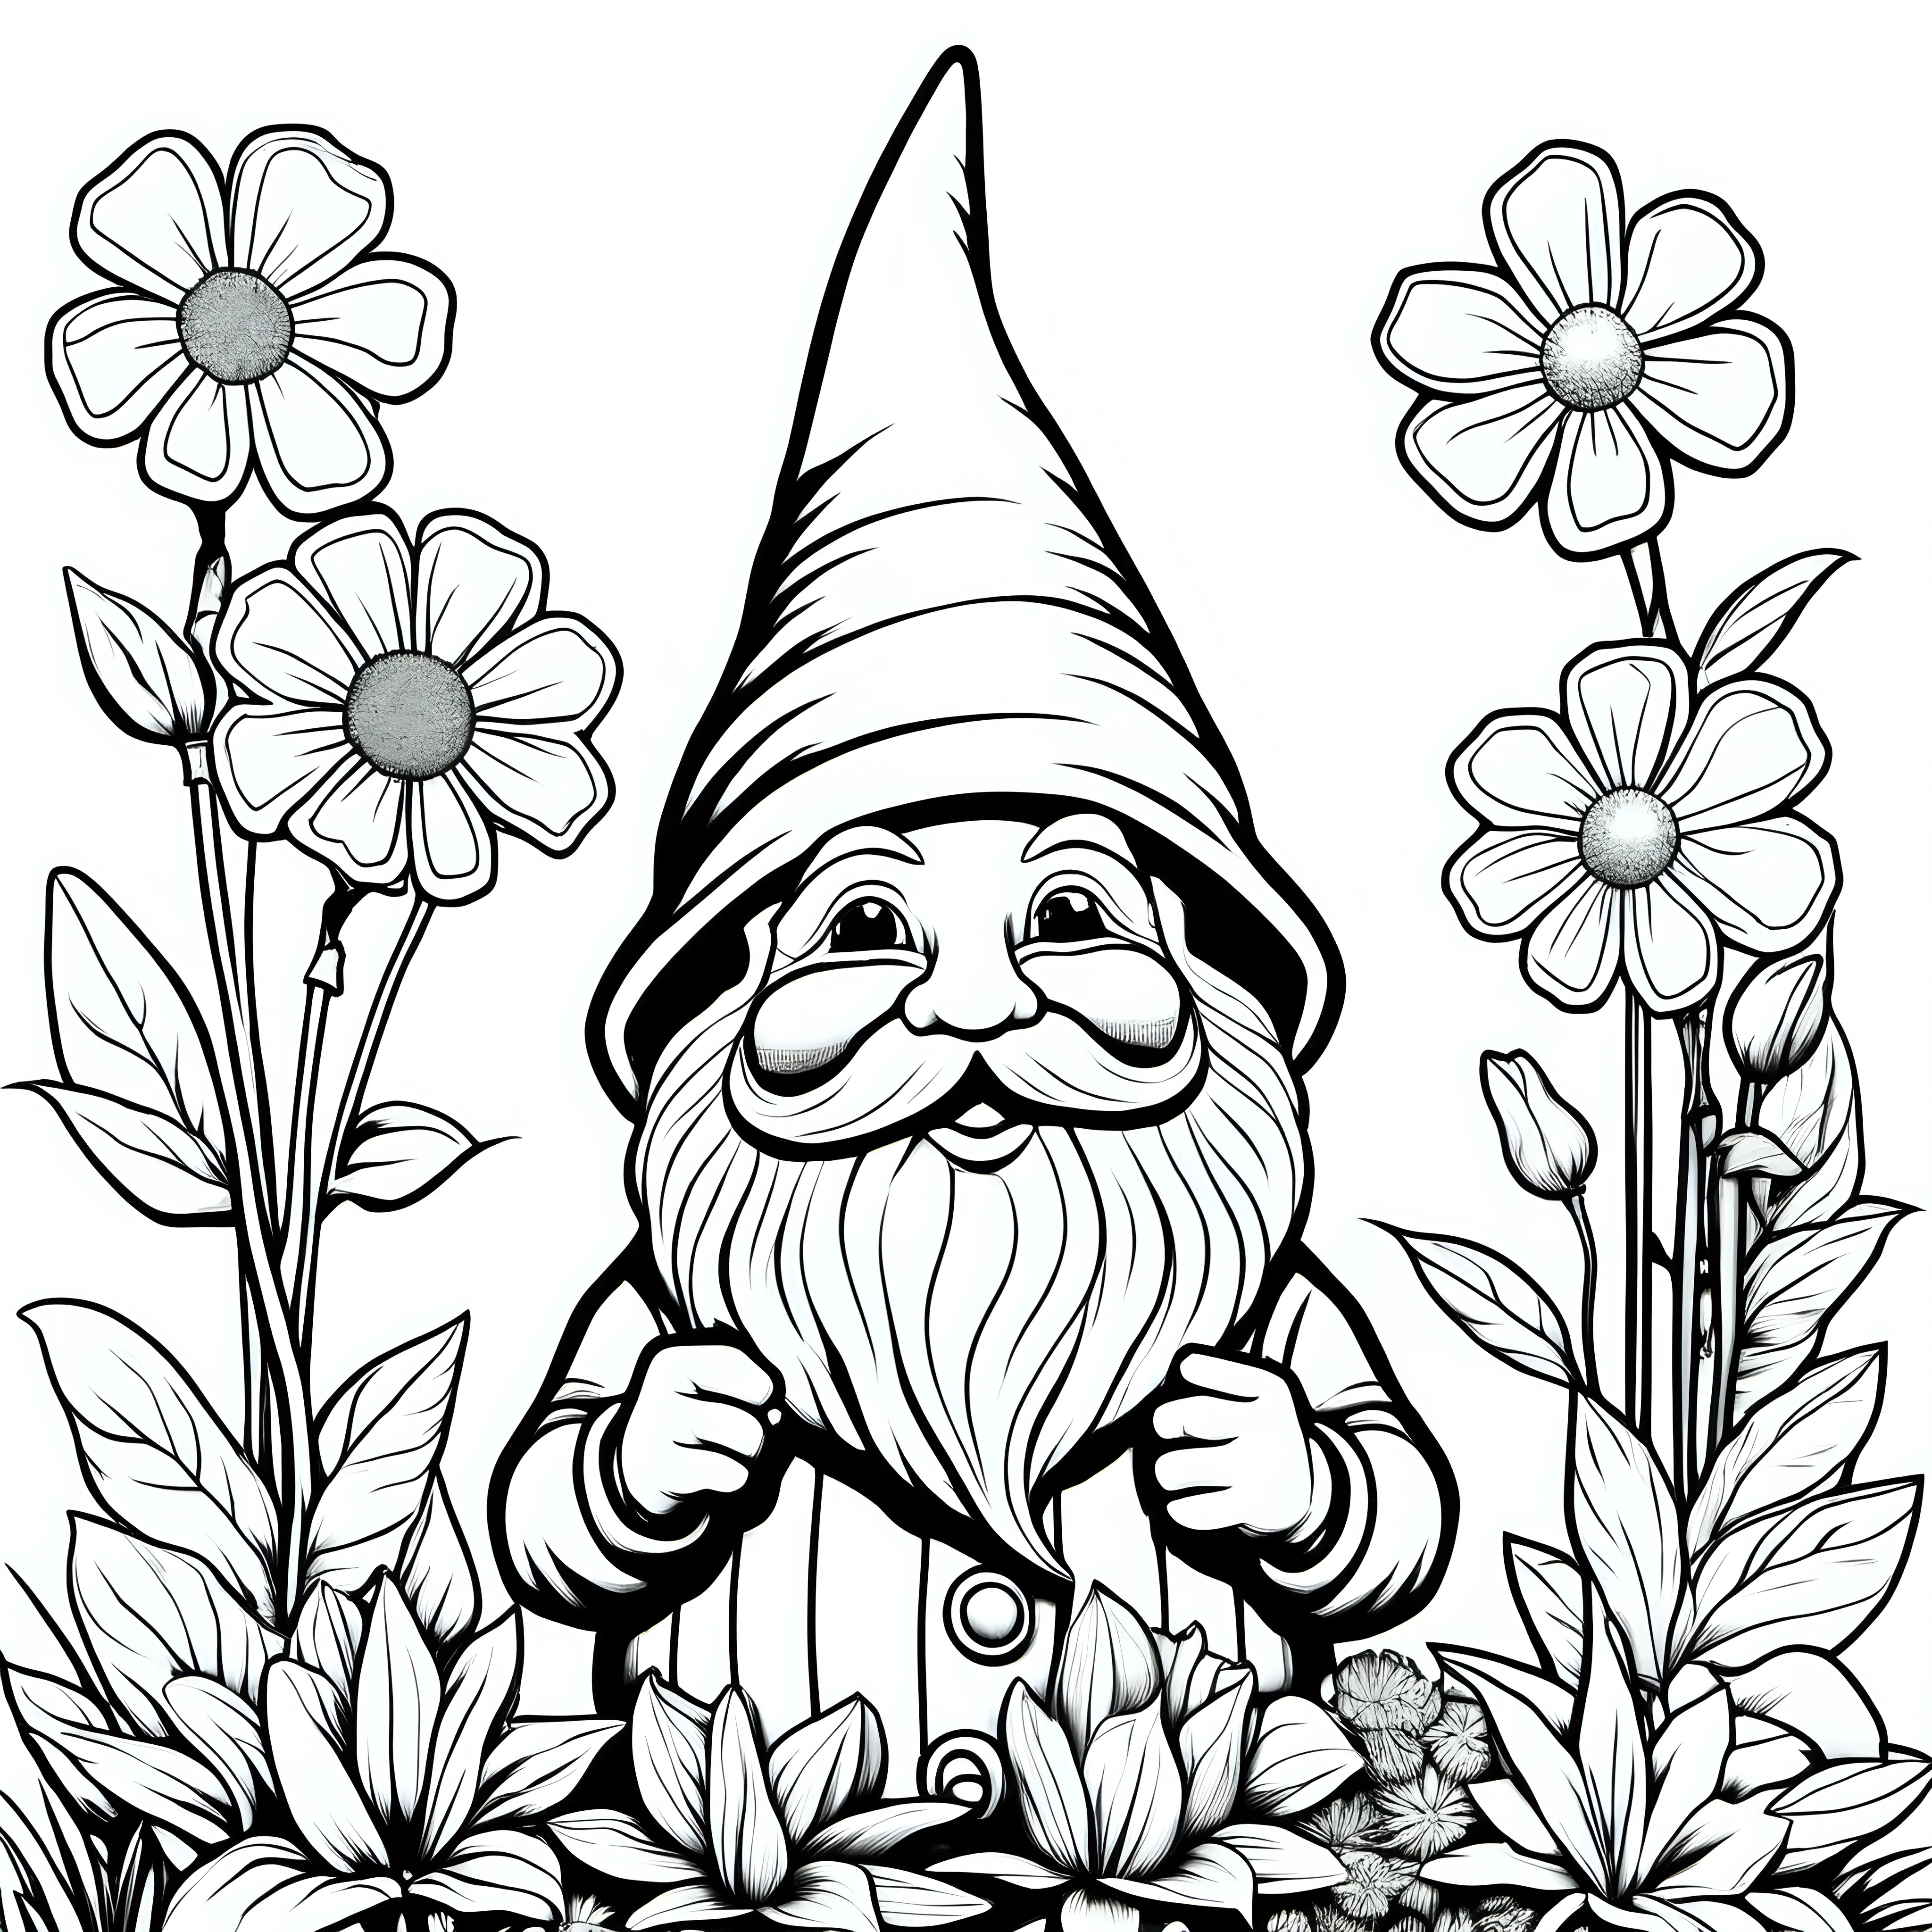 garden gnome smelling flowers, coloring page, simple, black and white, v 4